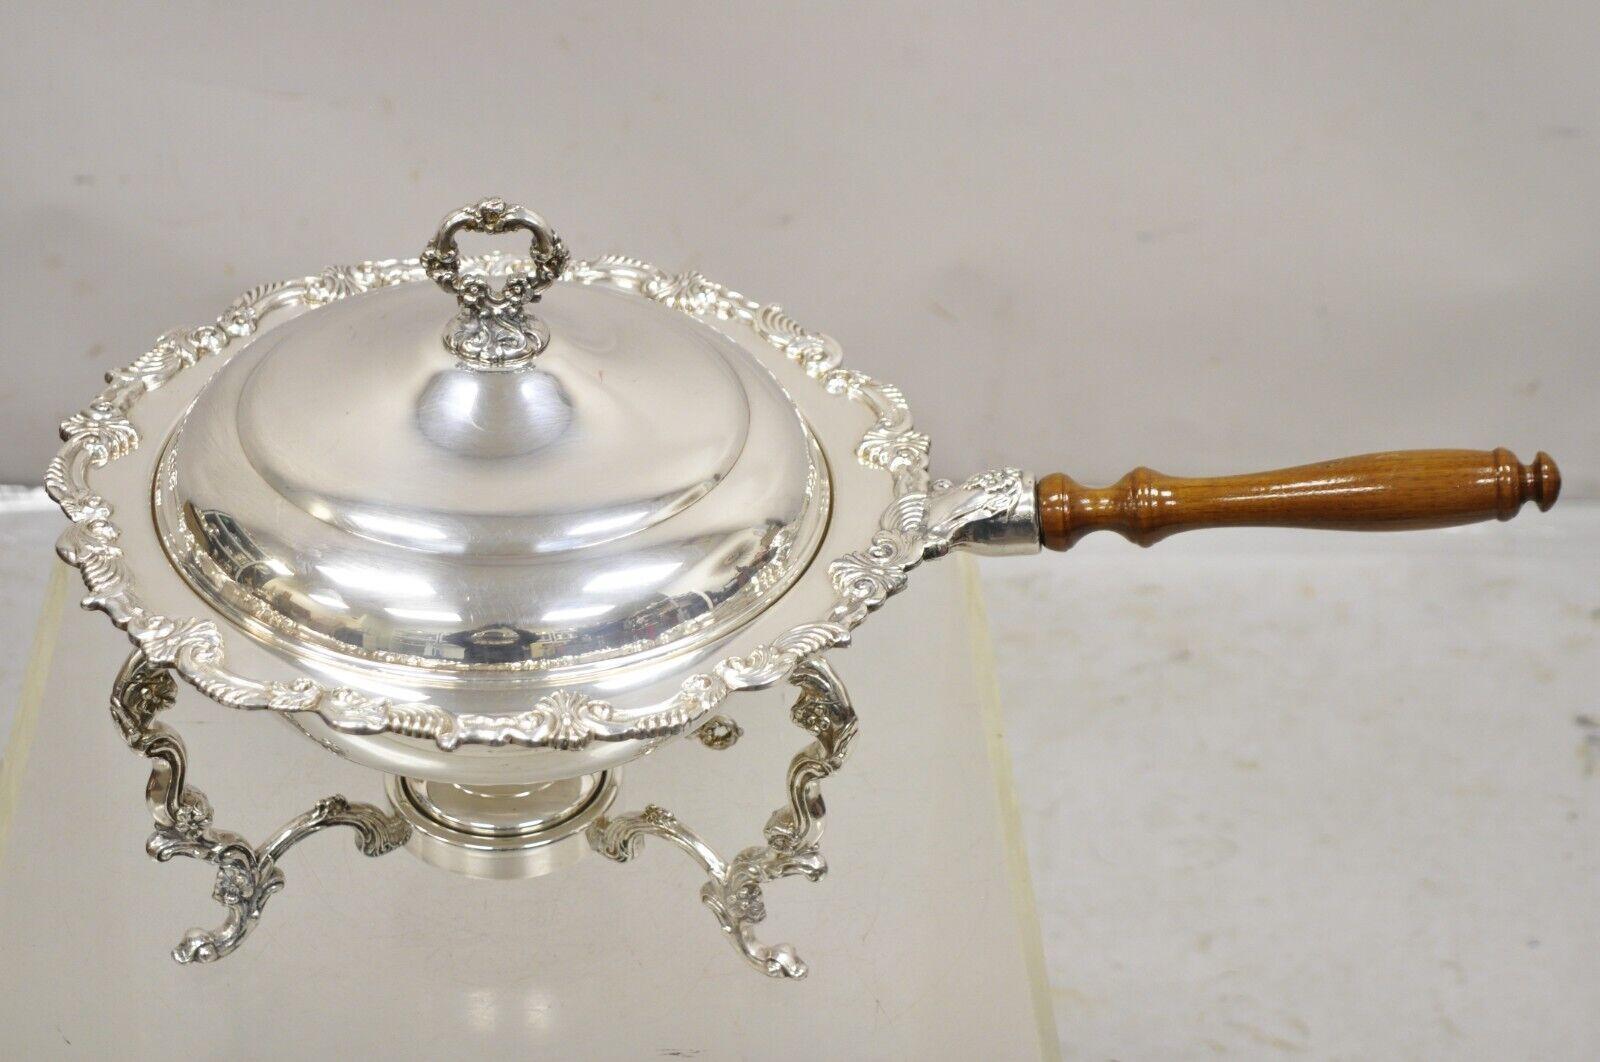 Vintage Victorian Style Ornate Silver Plated Chafing Dish Food Warmer with Wooden Handle and Burner. Circa Mid 20th Century.
Measurements:  11.5